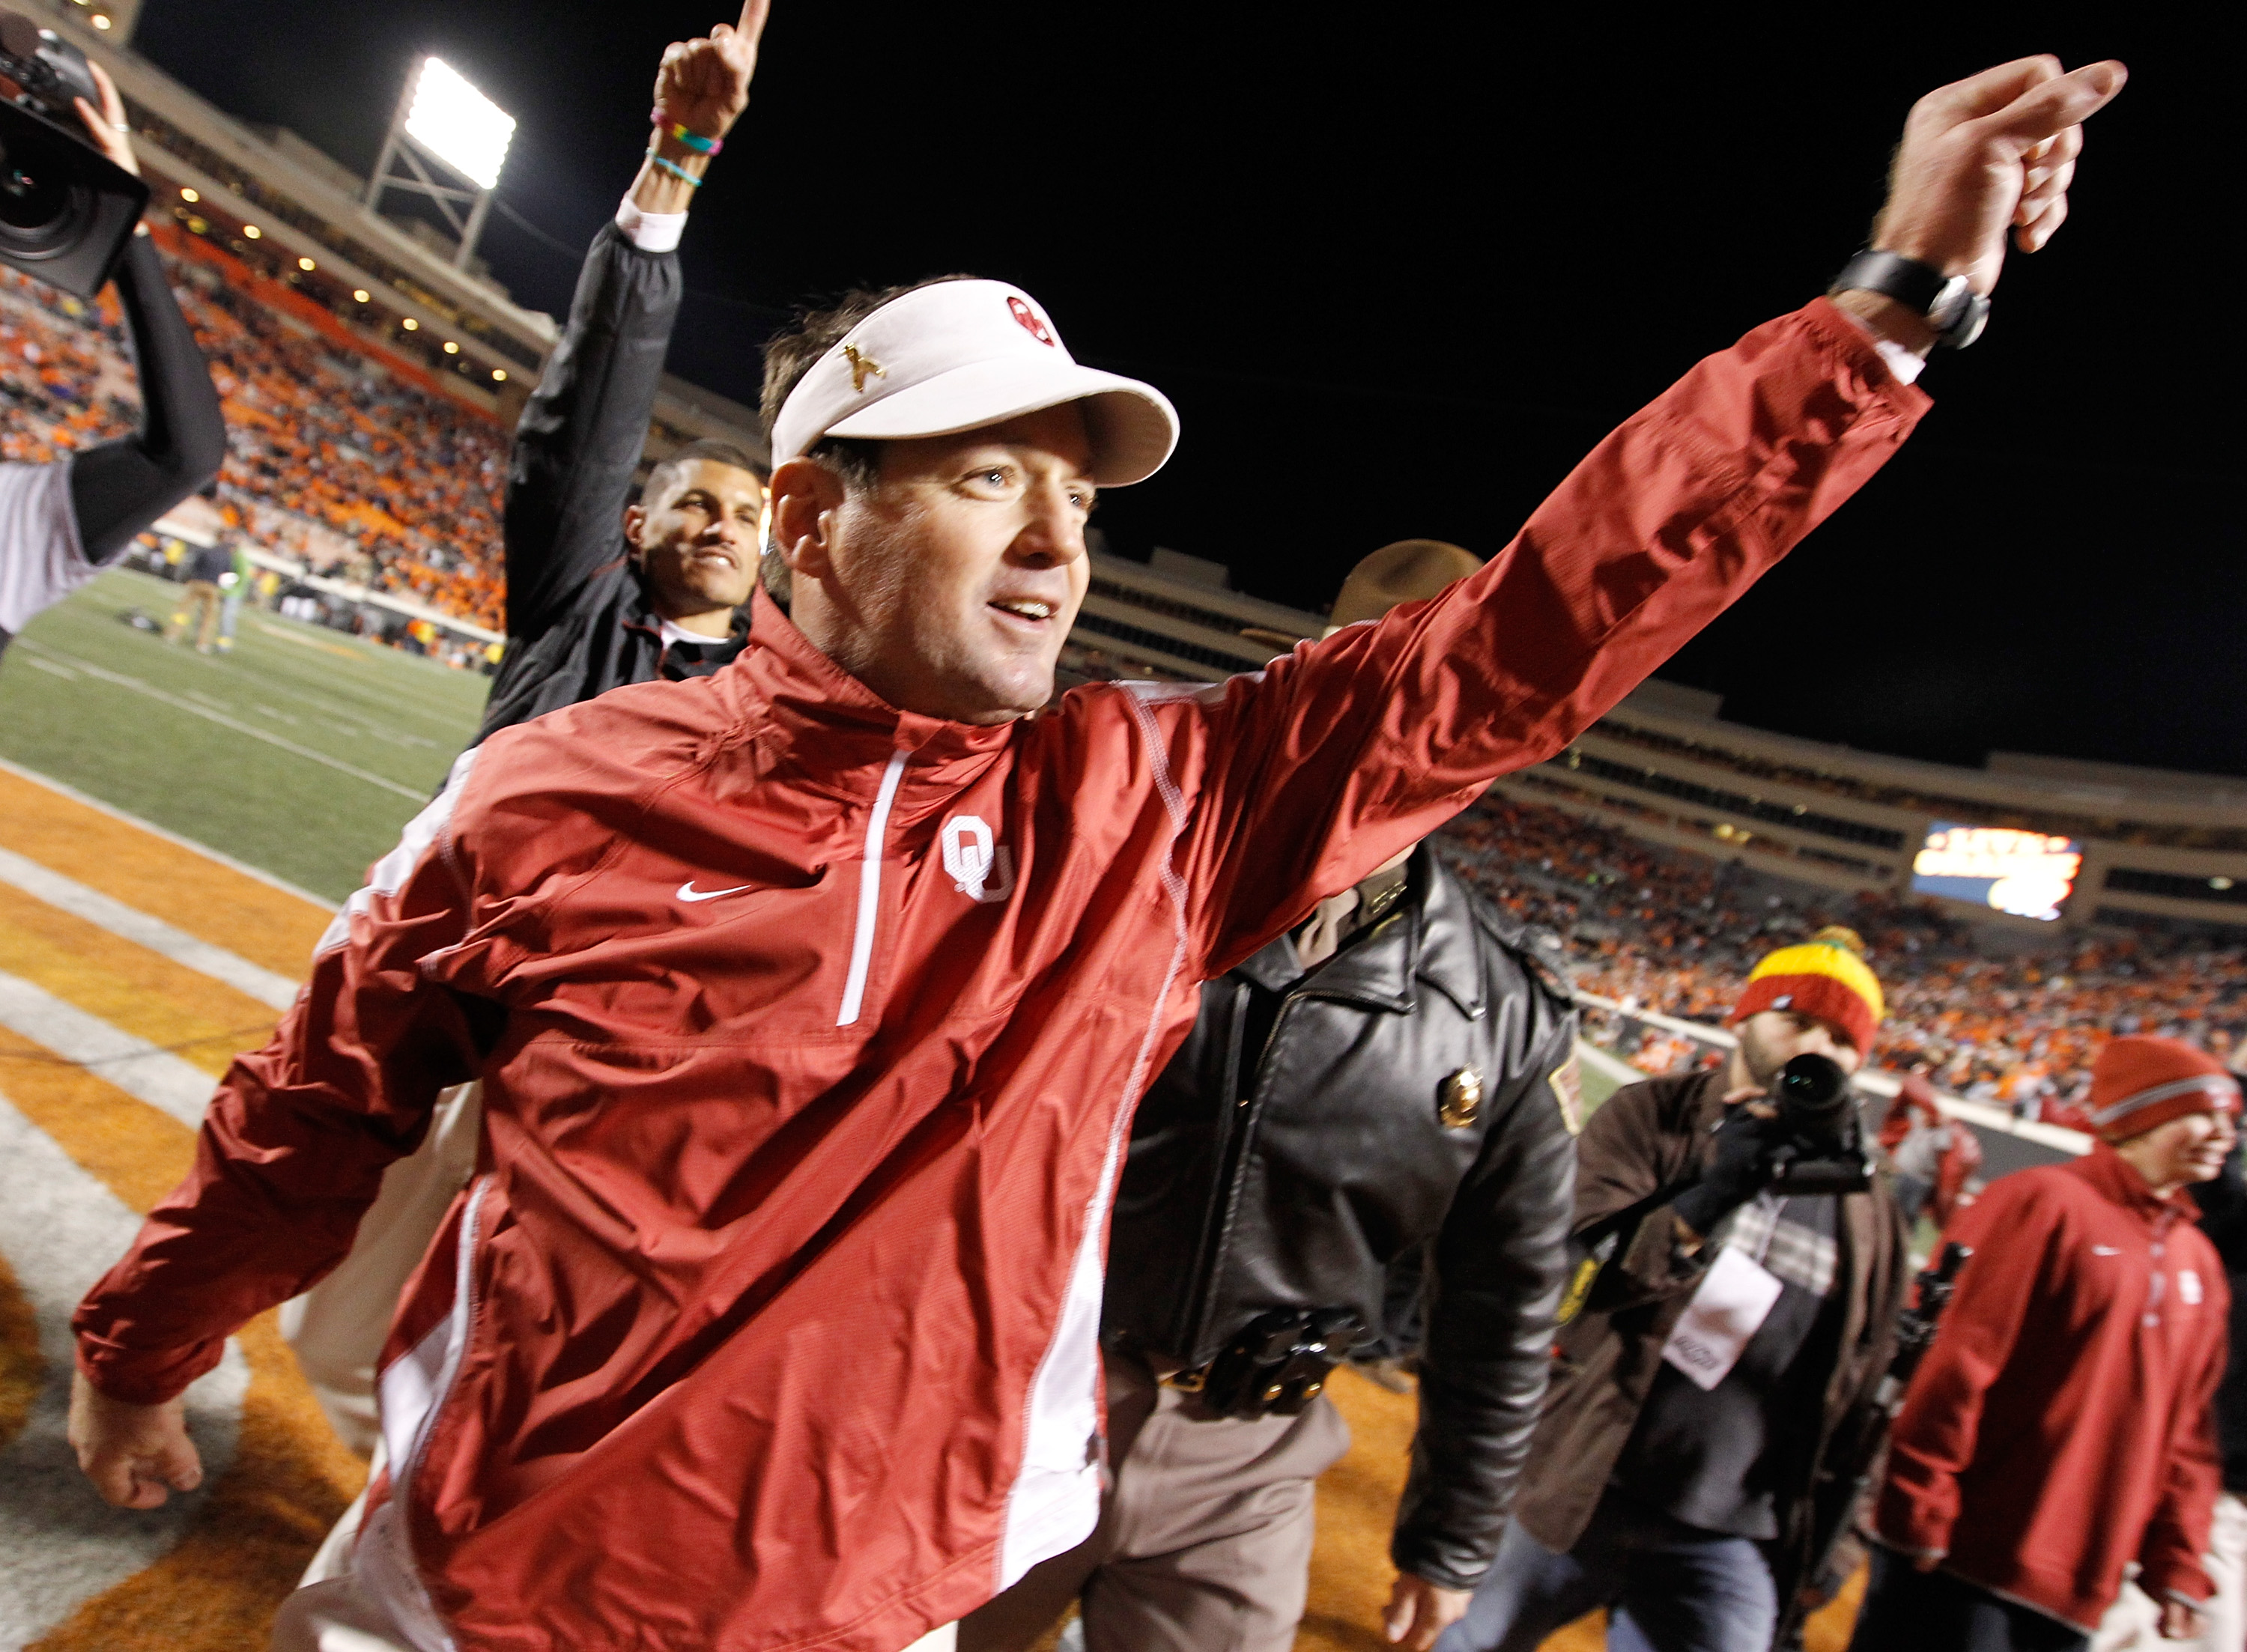 STILLWATER, OK - NOVEMBER 27:  Head coach Bob Stoops of the Oklahoma Sooners celebrates after the Sooners beat the Oklahoma State Cowboys 47-41 at Boone Pickens Stadium on November 27, 2010 in Stillwater, Oklahoma.  (Photo by Tom Pennington/Getty Images)